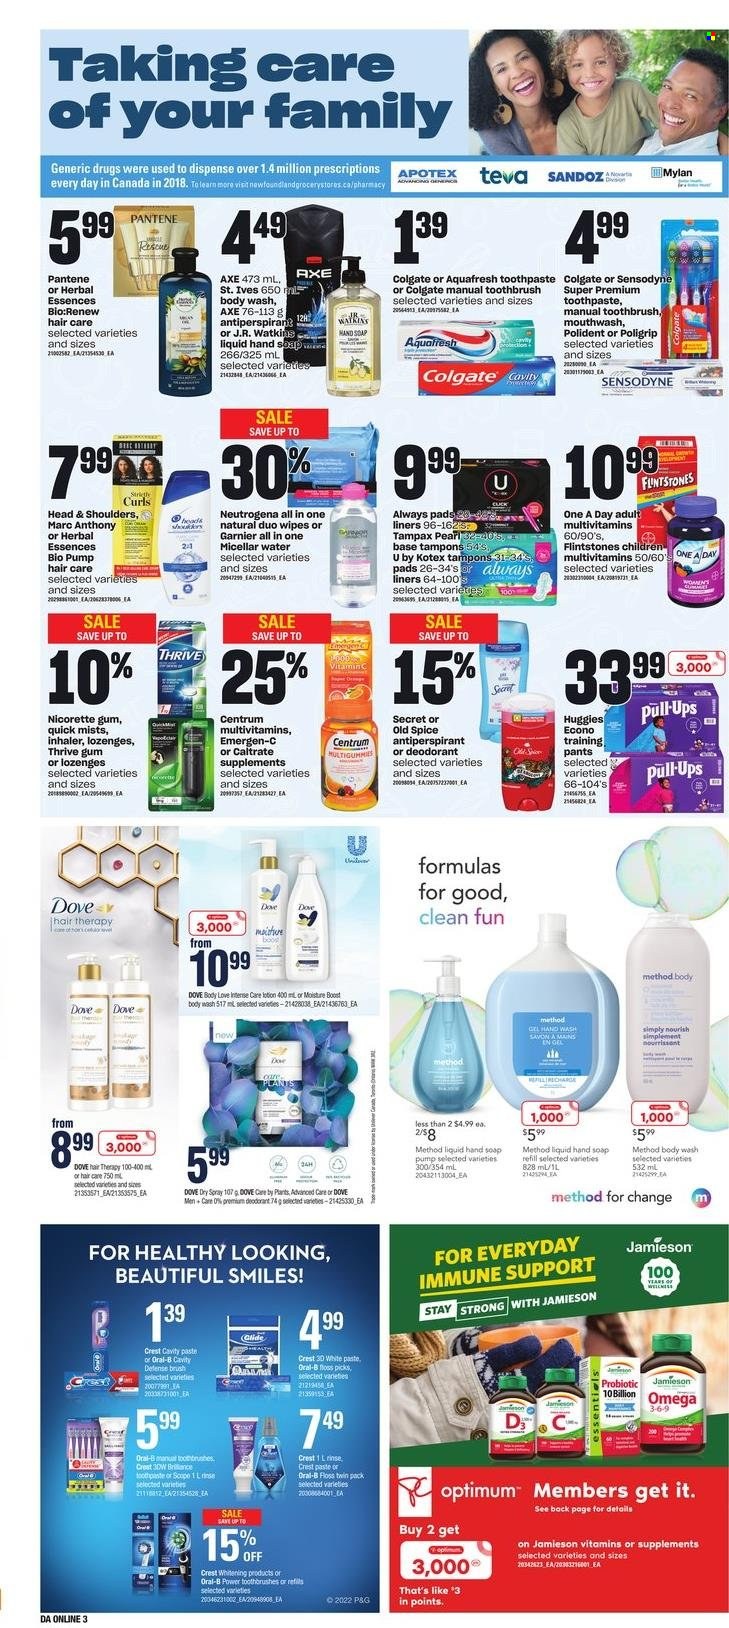 thumbnail - Dominion Flyer - December 01, 2022 - December 07, 2022 - Sales products - oranges, Dove, spice, Boost, wipes, pants, baby pants, Always liners, body wash, hand soap, hand wash, soap, toothbrush, toothpaste, mouthwash, Polident, Crest, Always pads, Kotex, tampons, micellar water, Herbal Essences, body lotion, anti-perspirant, Axe, book, Optimum, multivitamin, Nicorette, vitamin c, Omega-3, Emergen-C, Nicorette Gum, Centrum, scope, Colgate, Garnier, Neutrogena, Tampax, Head & Shoulders, Huggies, Pantene, Old Spice, Oral-B, Sensodyne, deodorant. Page 7.